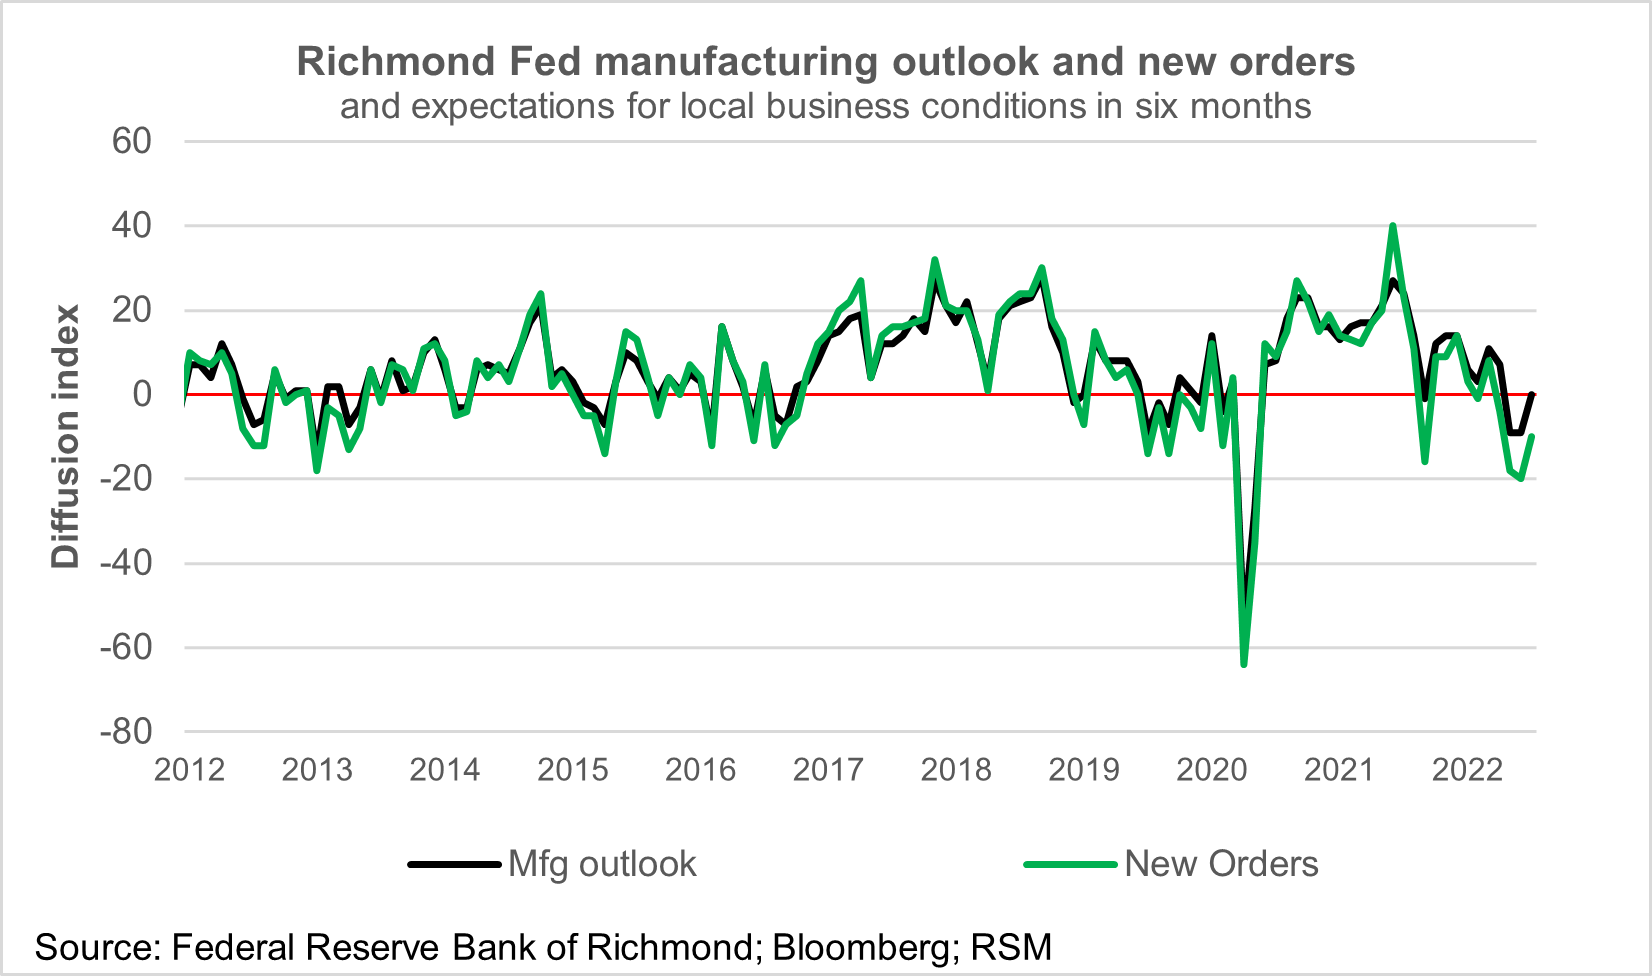 A chart shows the Richmond Fed manufacturing outlook and new orders, from 2012 through mid-2022